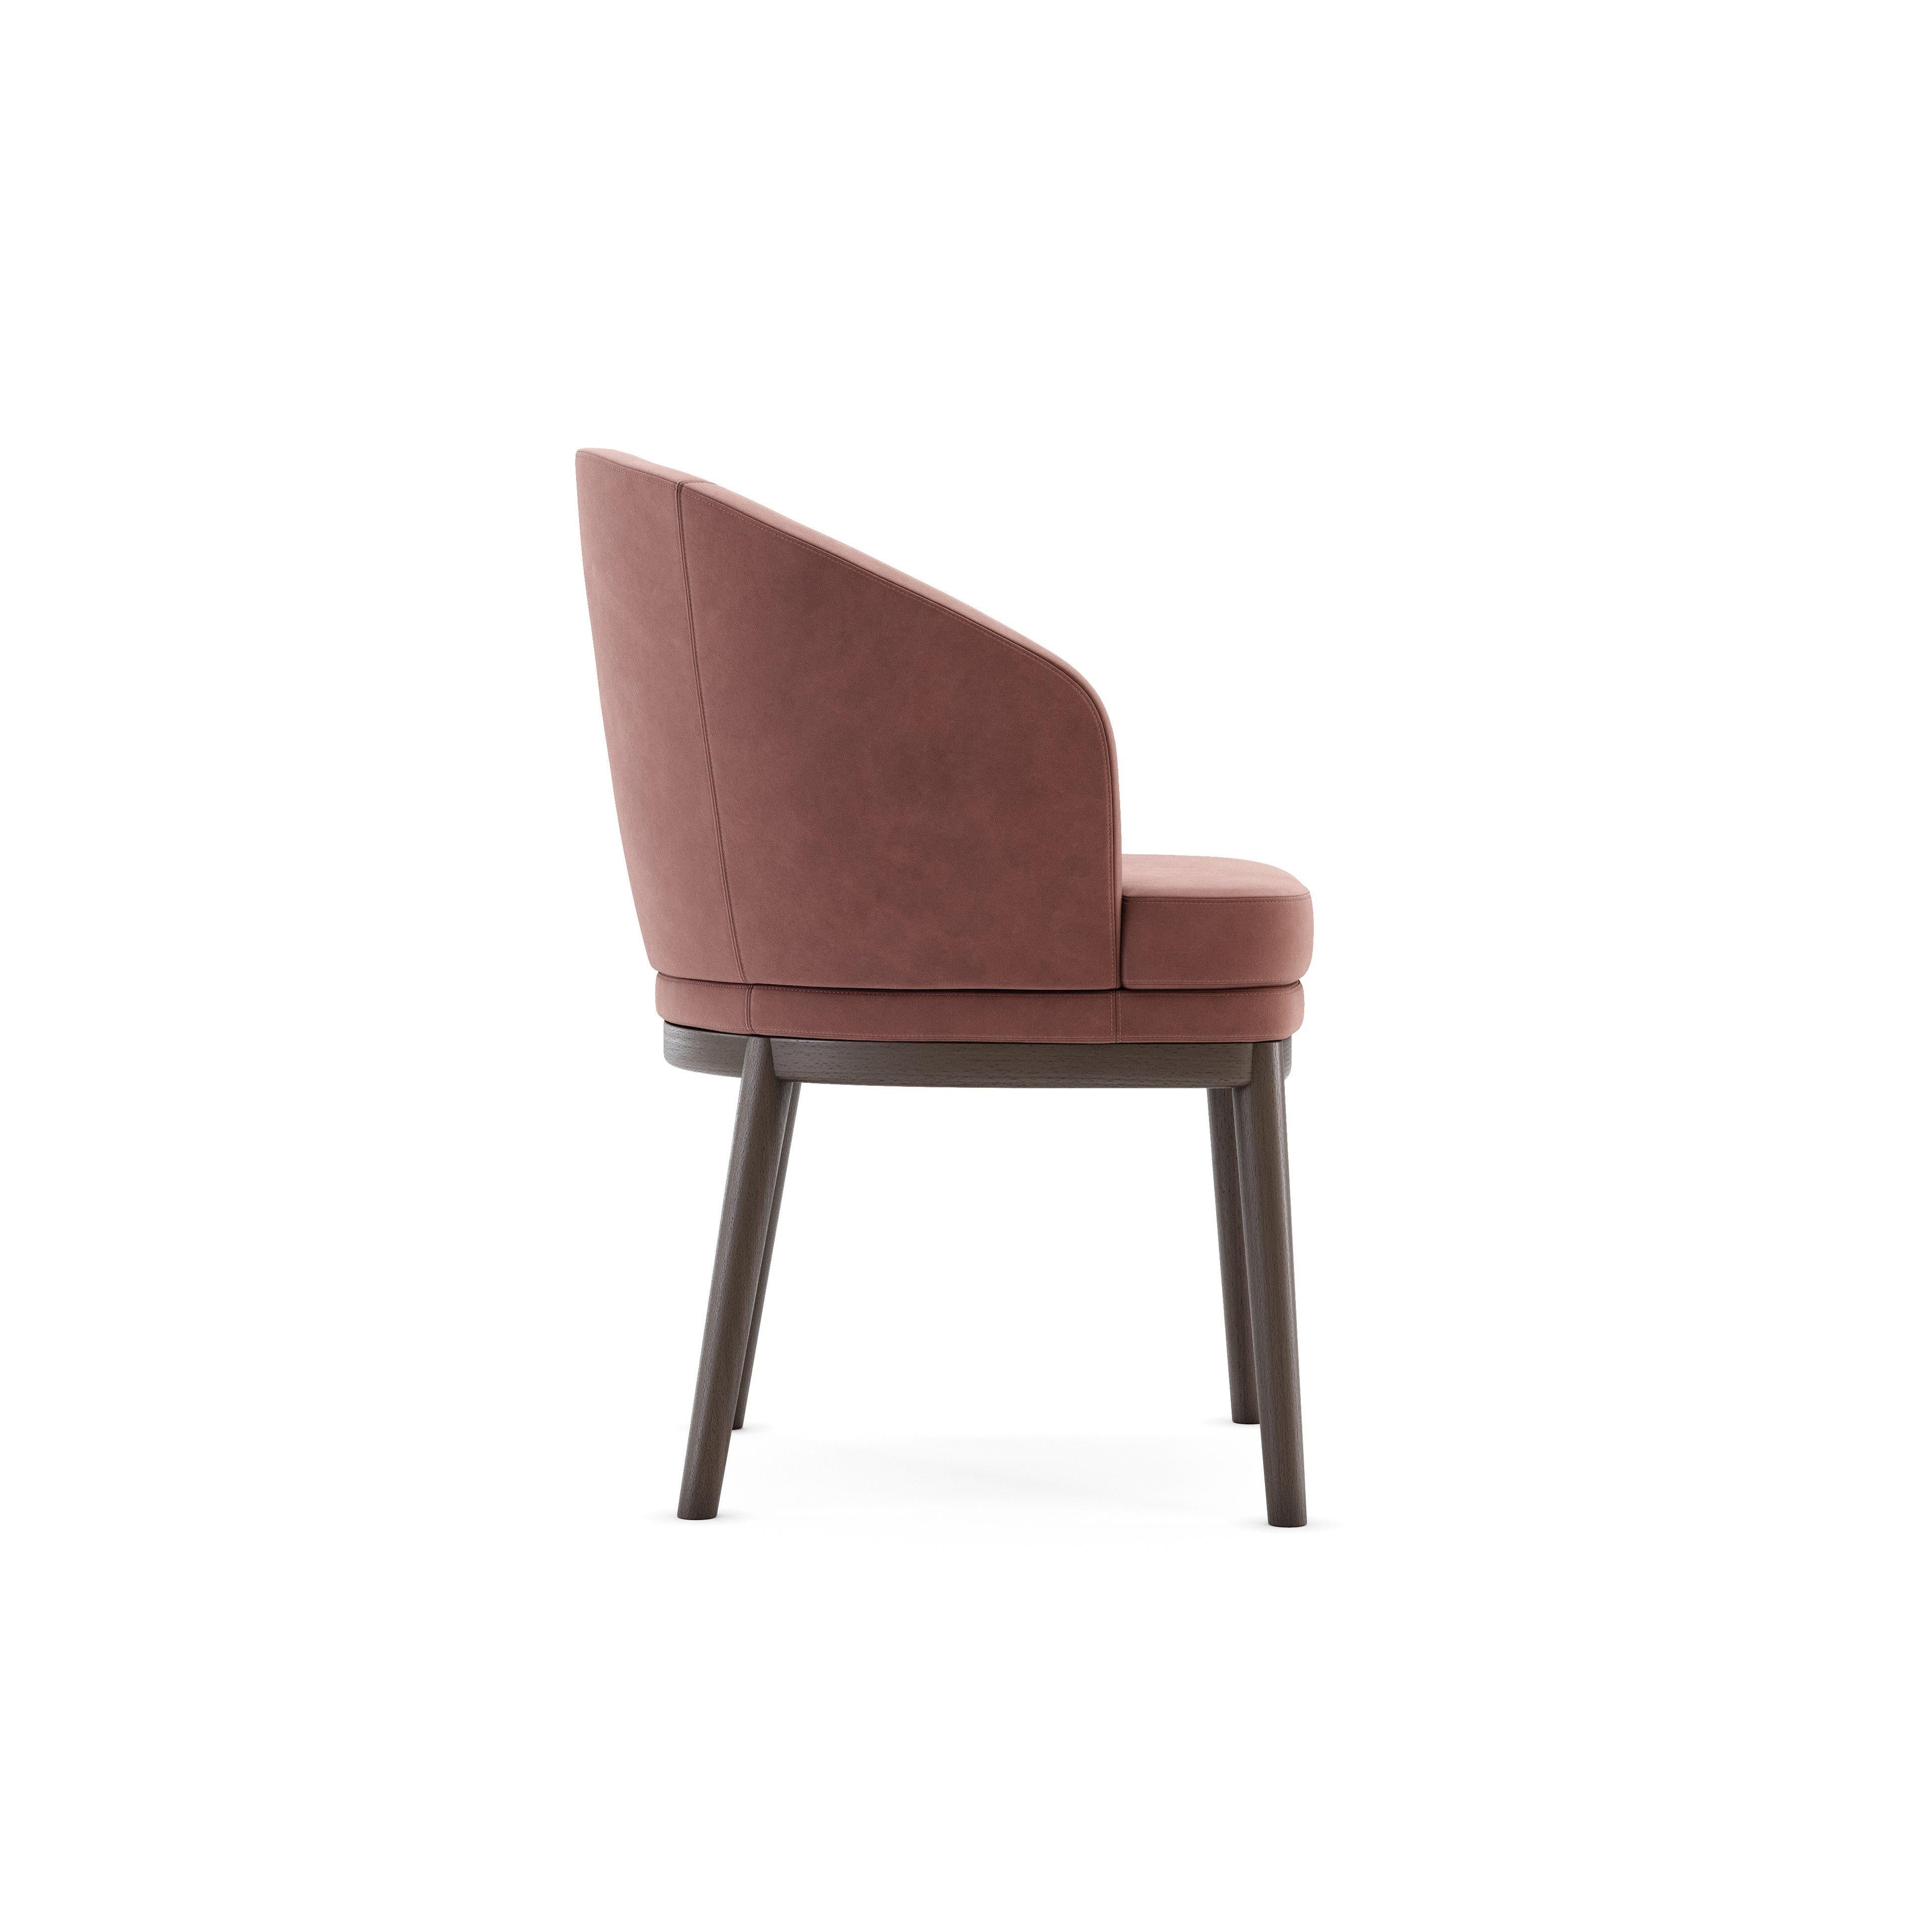 Portuguese 8 Contemporary Dining Chairs Offered in Rose Velvet For Sale